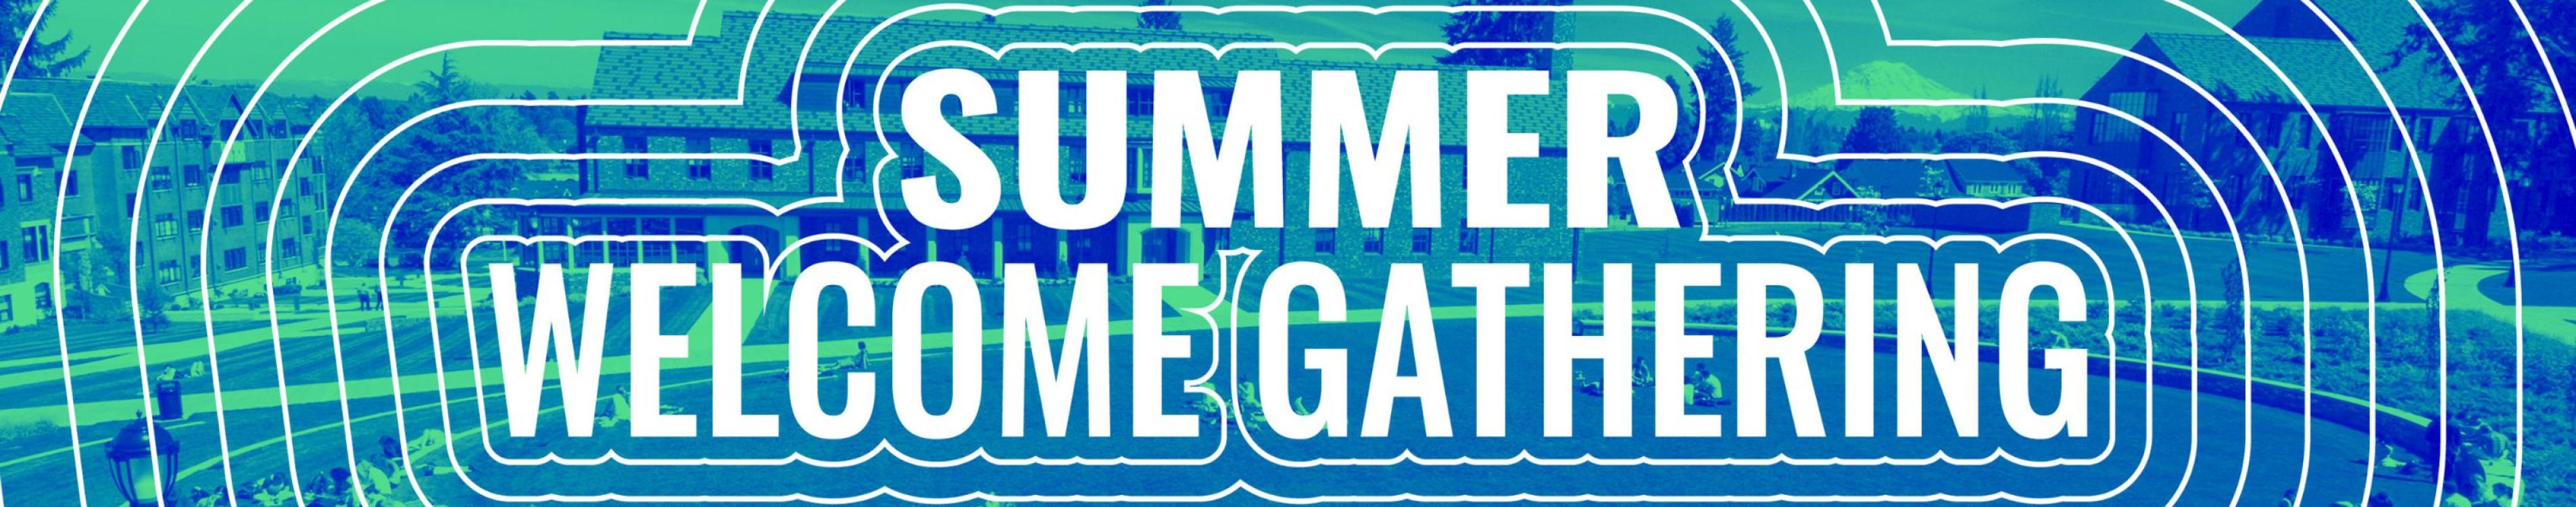 Banner with the text "Summer Welcome Gathering" over a digitally altered image of an outdoor area with buildings and trees, featuring layered blue and green circular patterns.